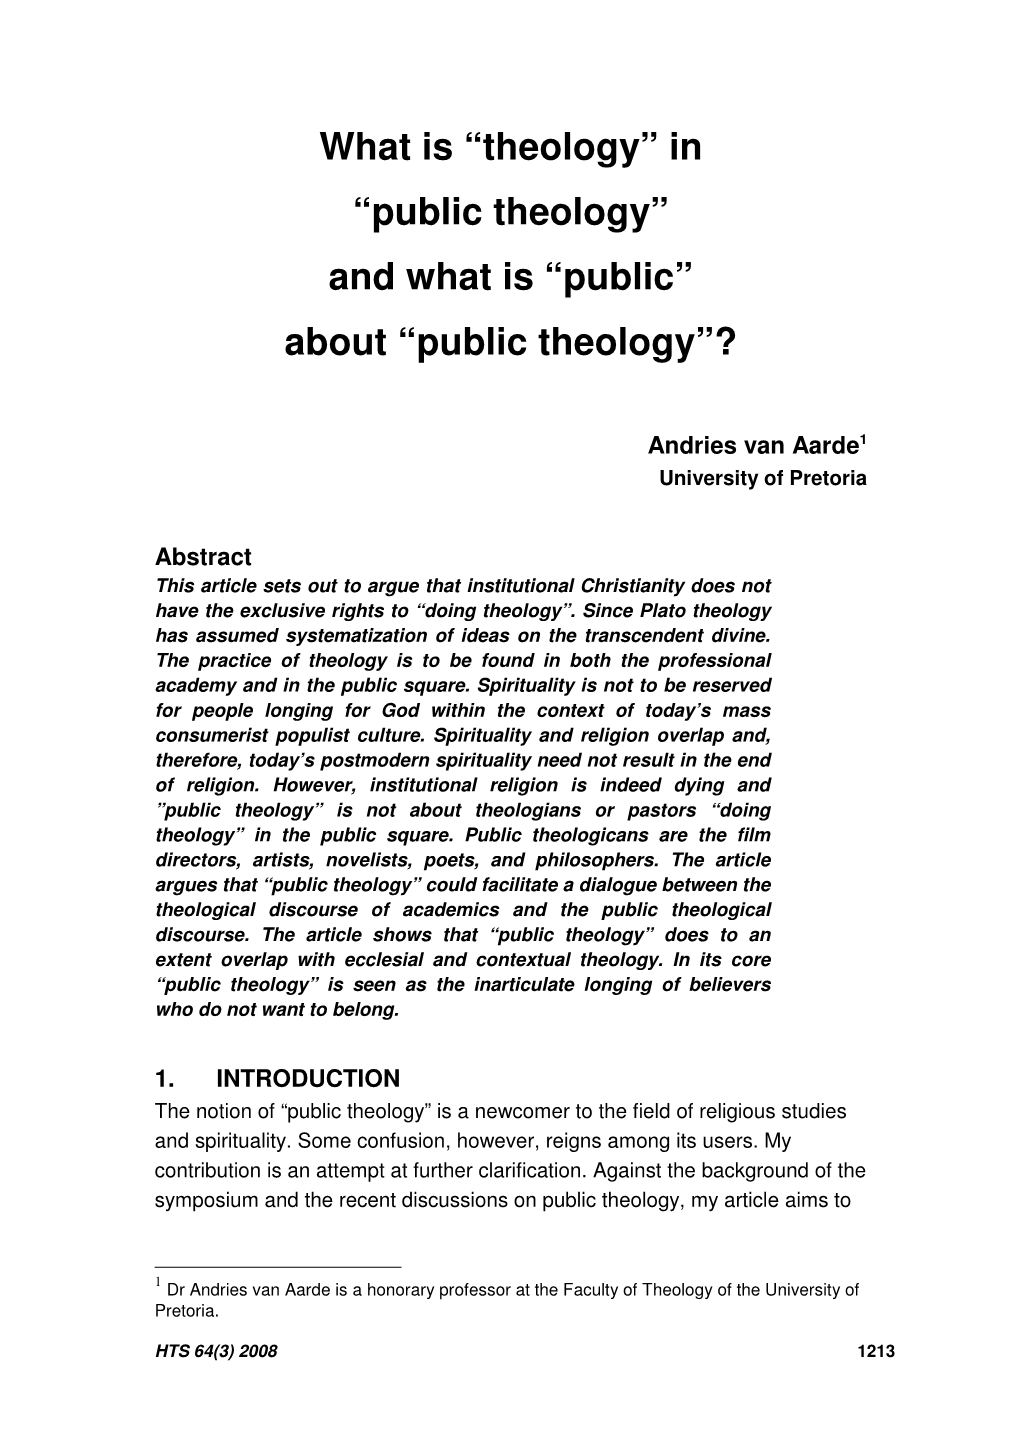 In “Public Theology” and What Is “Public” About “Public Theology”?